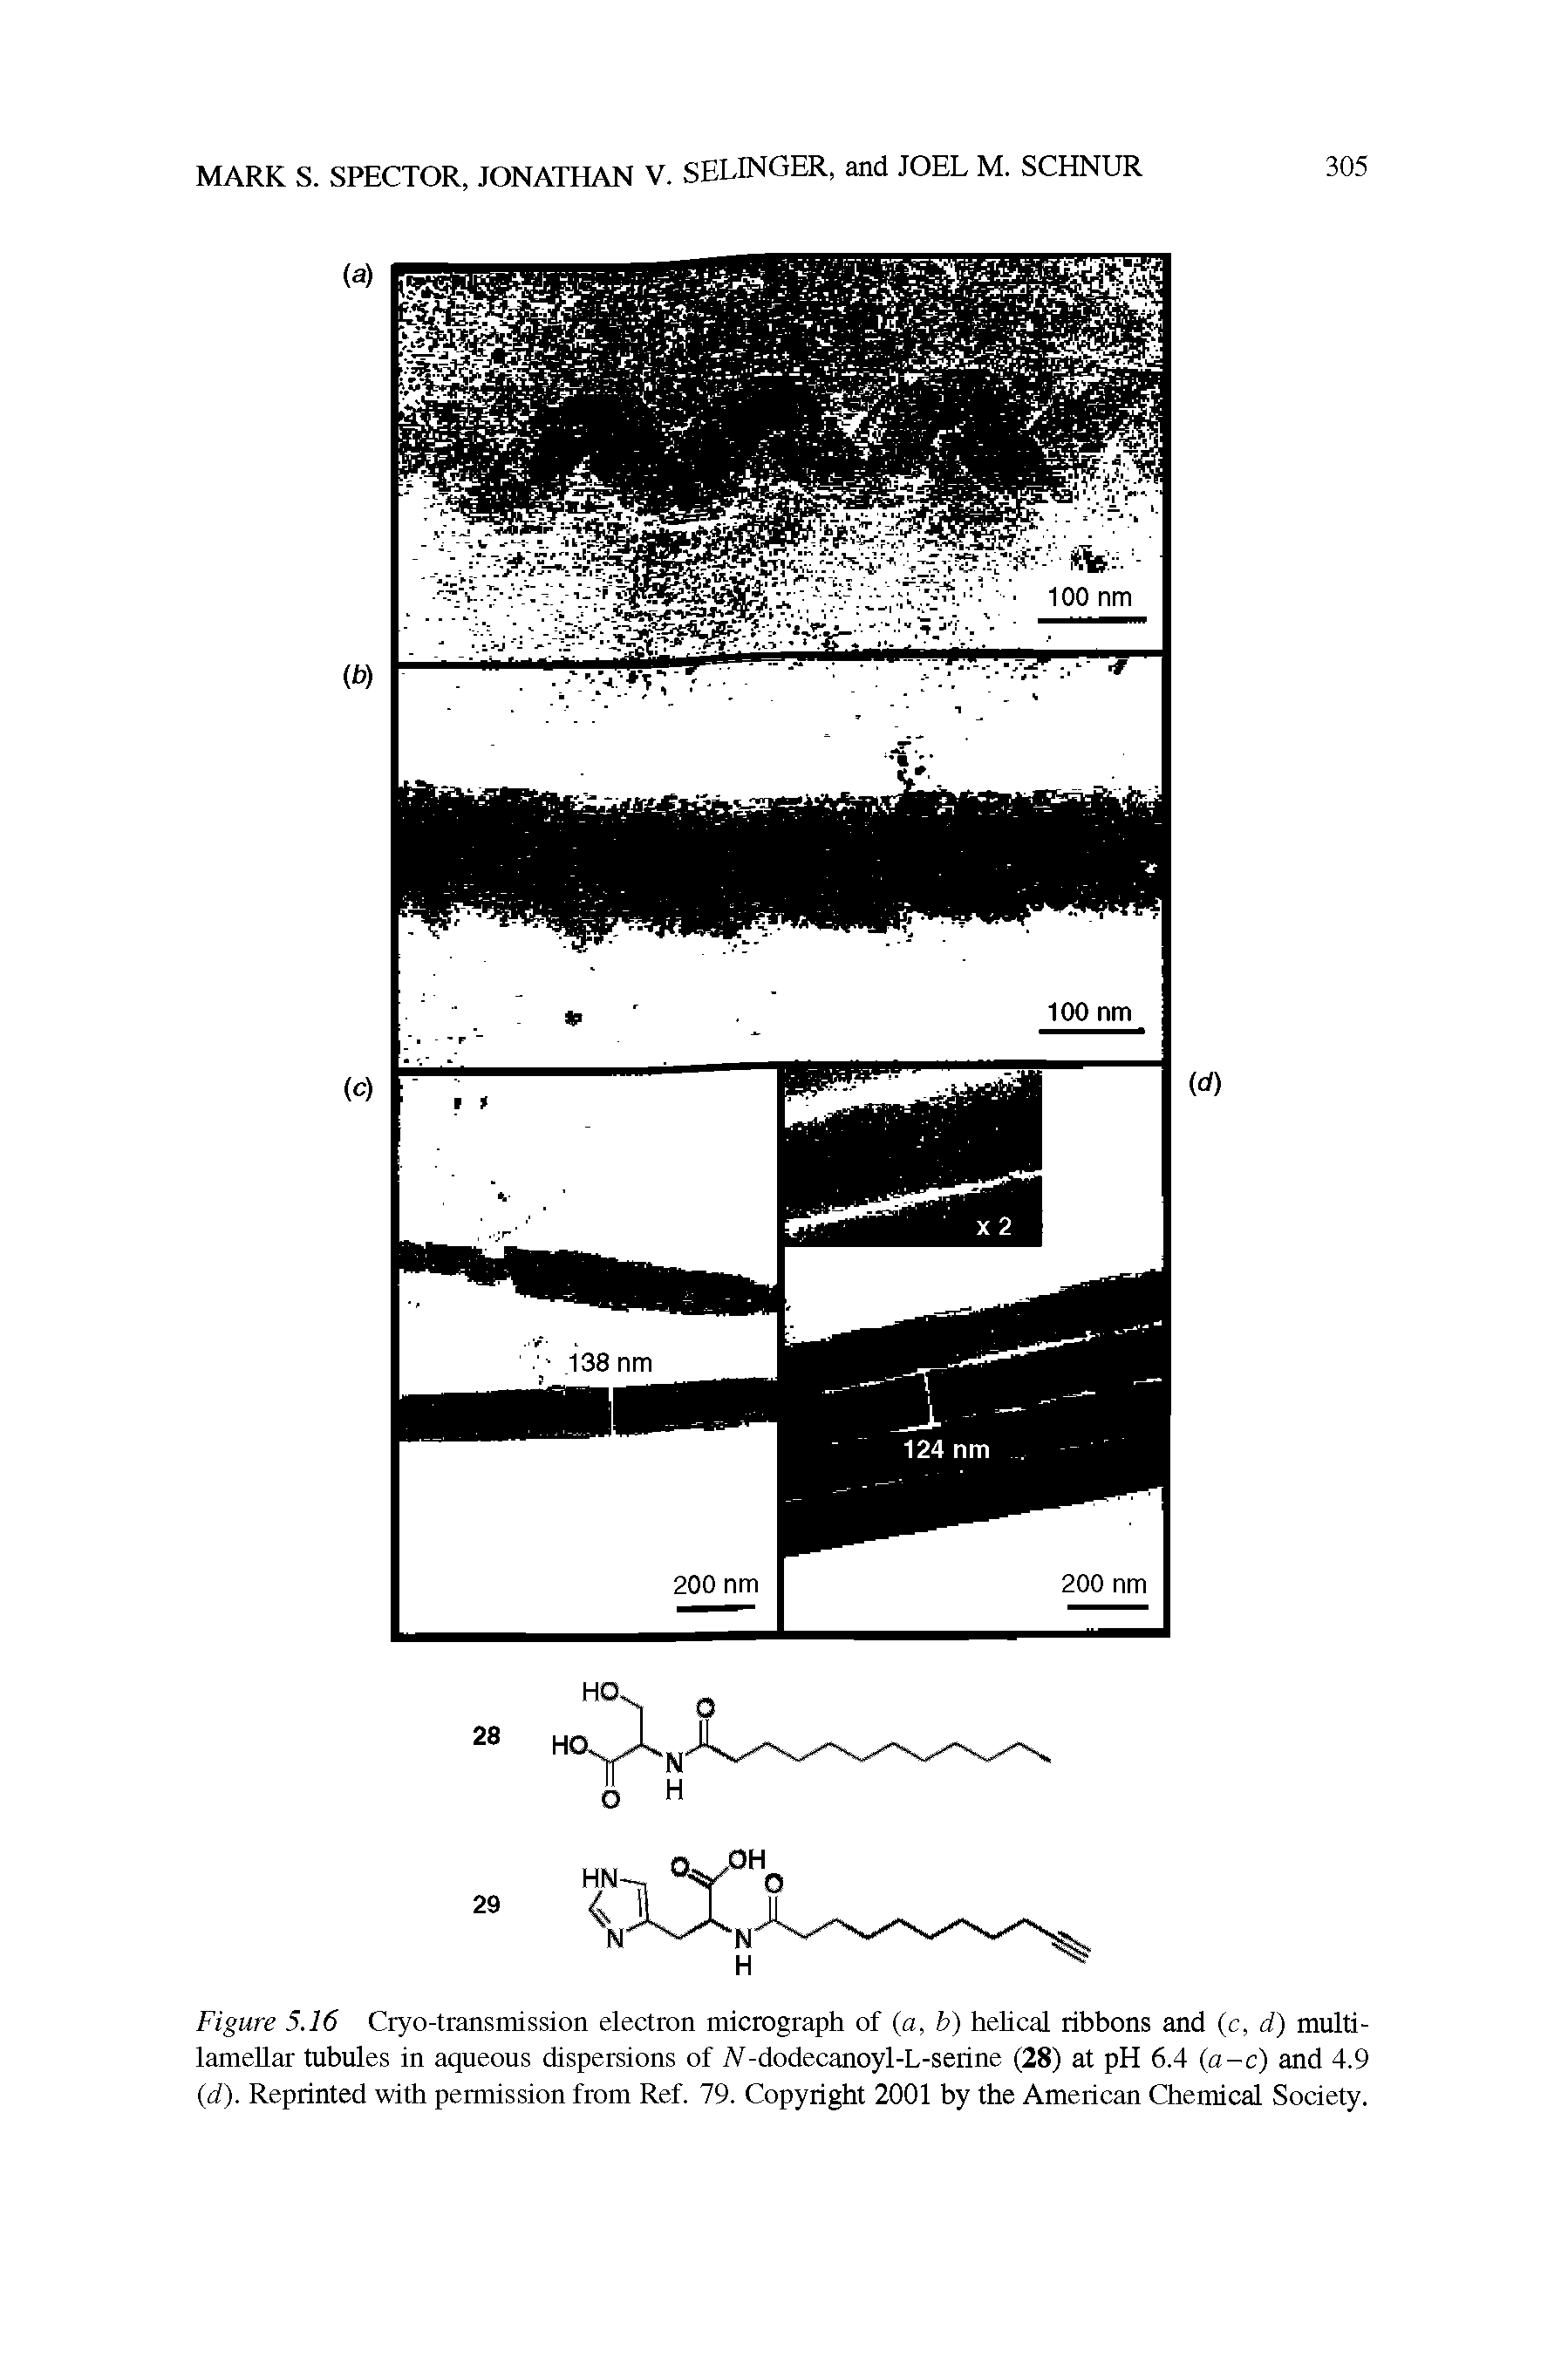 Figure 5.16 Cryo-transmission electron micrograph of (a, b) helical ribbons and (c, d) multi-lamellar tubules in aqueous dispersions of A-dodecanoyl-L-serine (28) at pH 6.4 (a-c) and 4.9 (d). Reprinted with permission from Ref. 79. Copyright 2001 by the American Chemical Society.